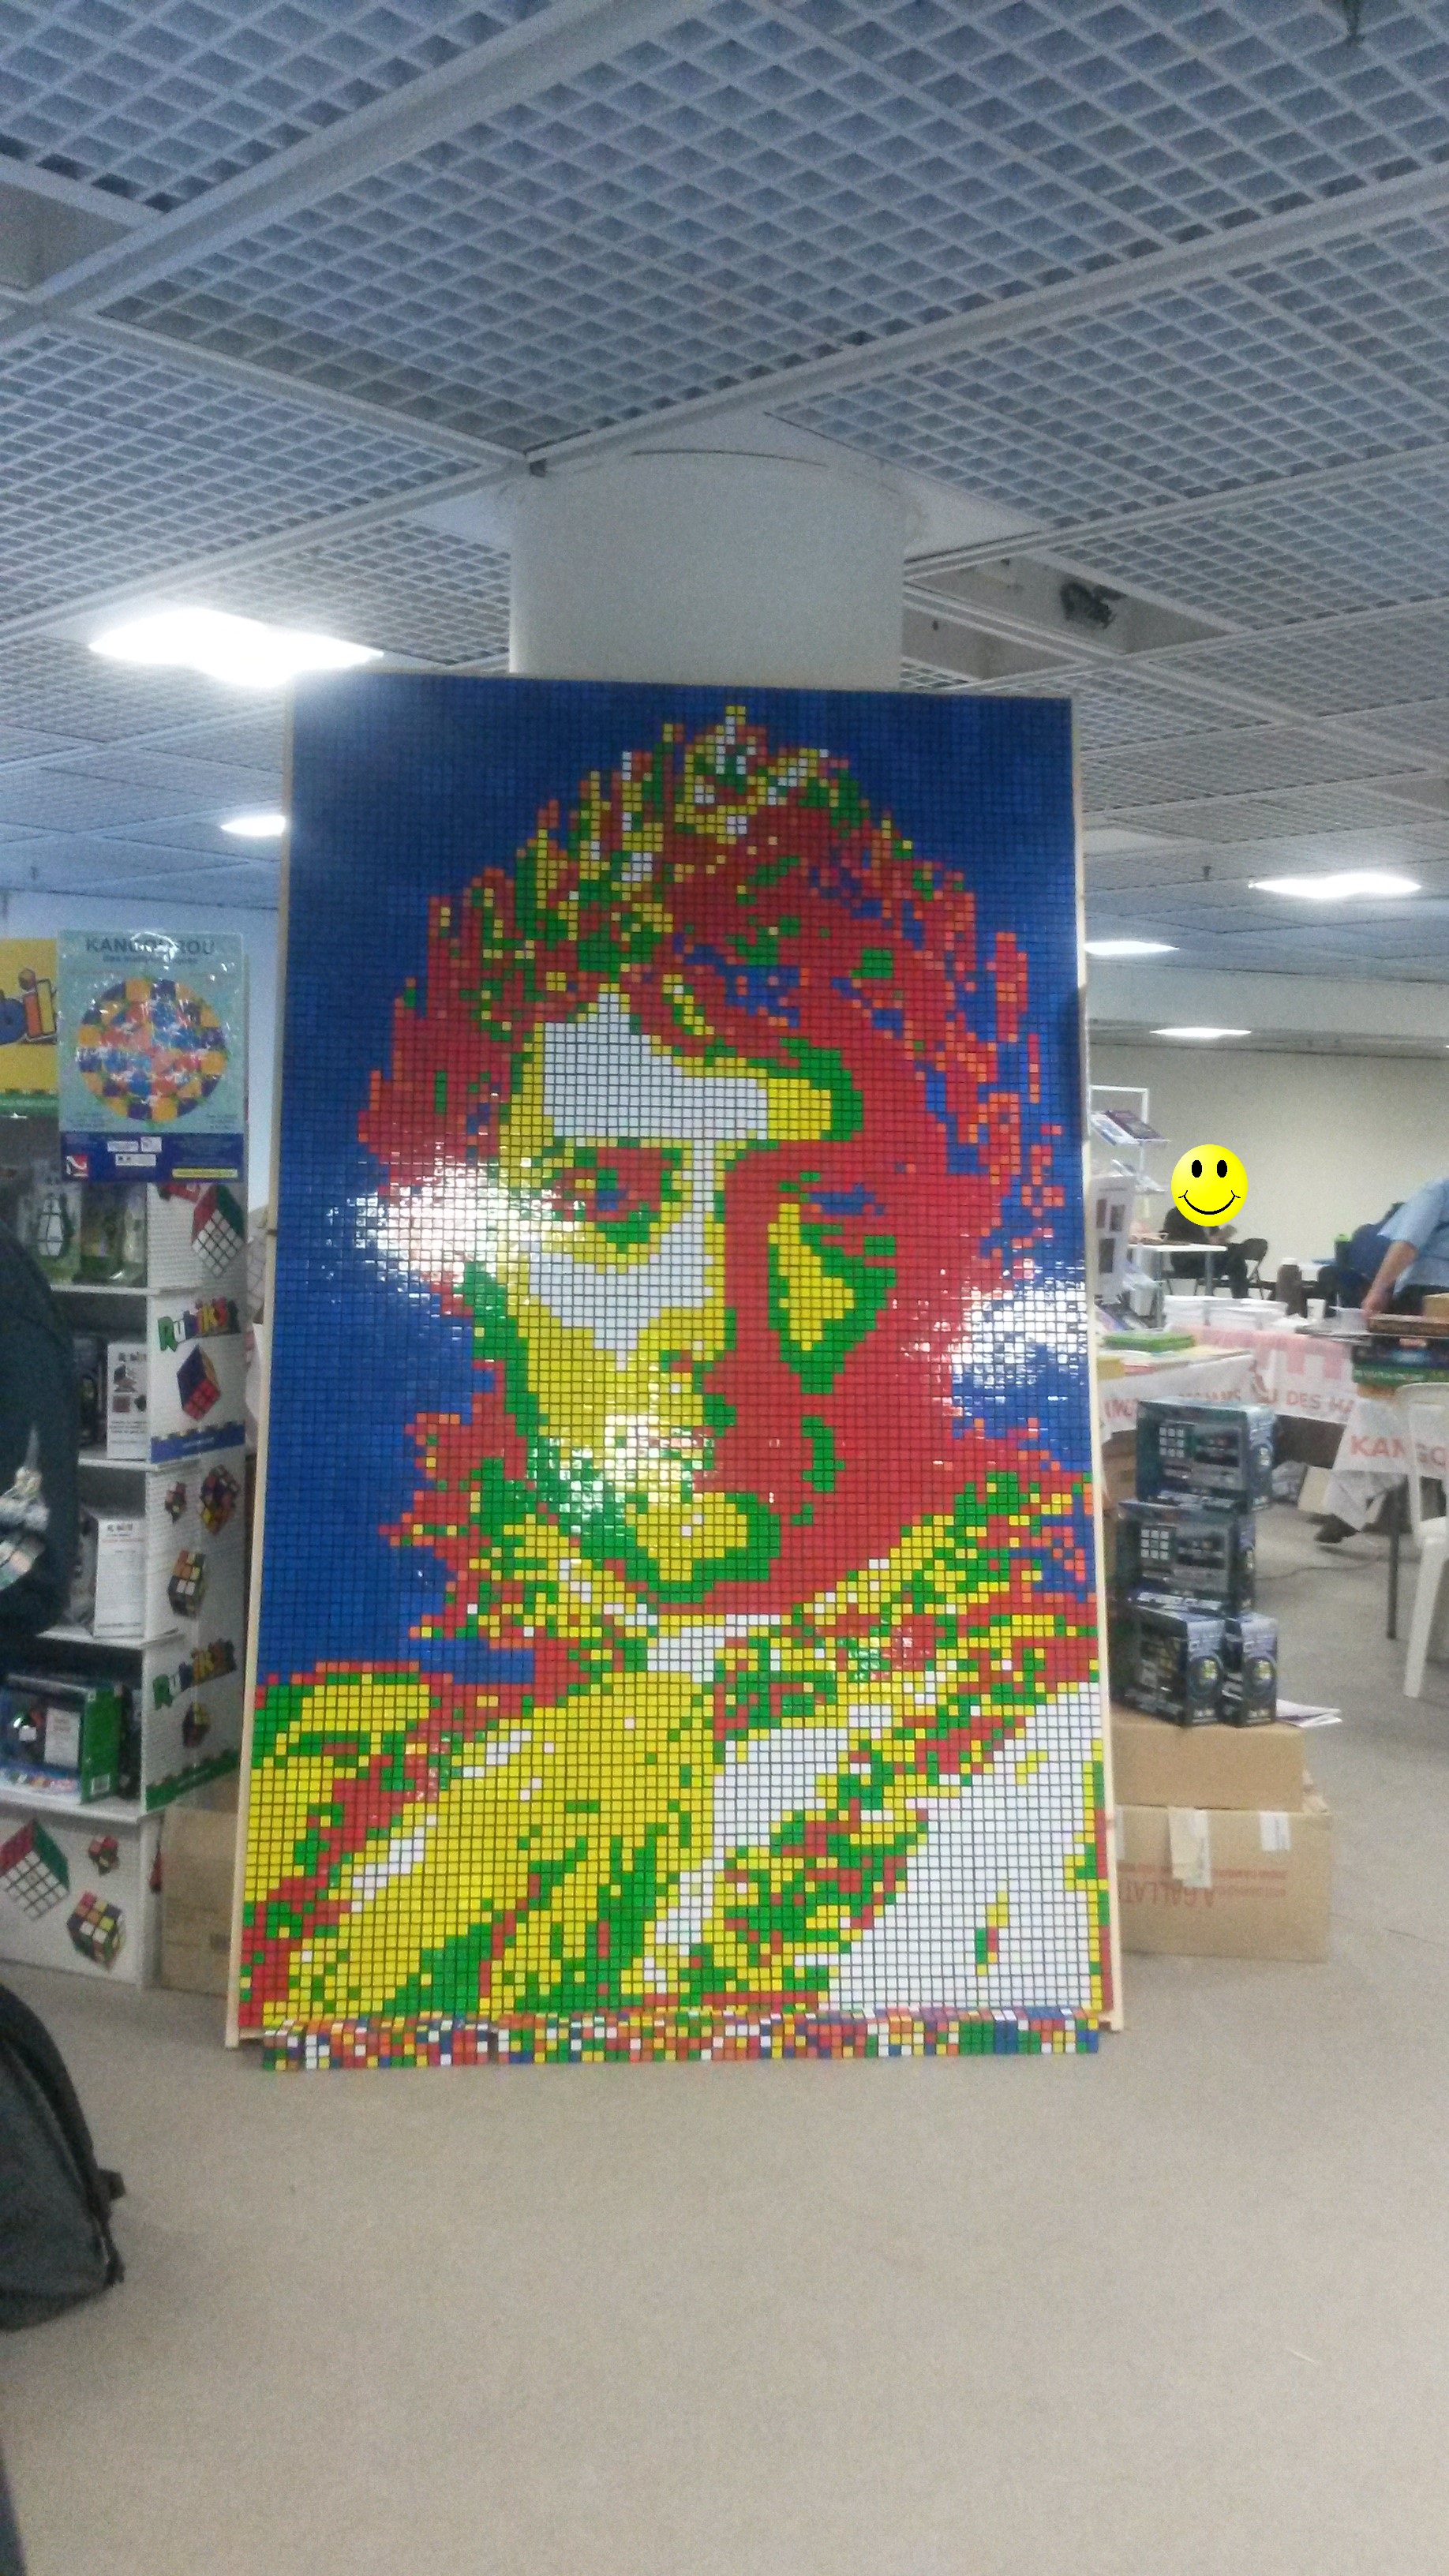 A fresco made from pieces of rubik's kub